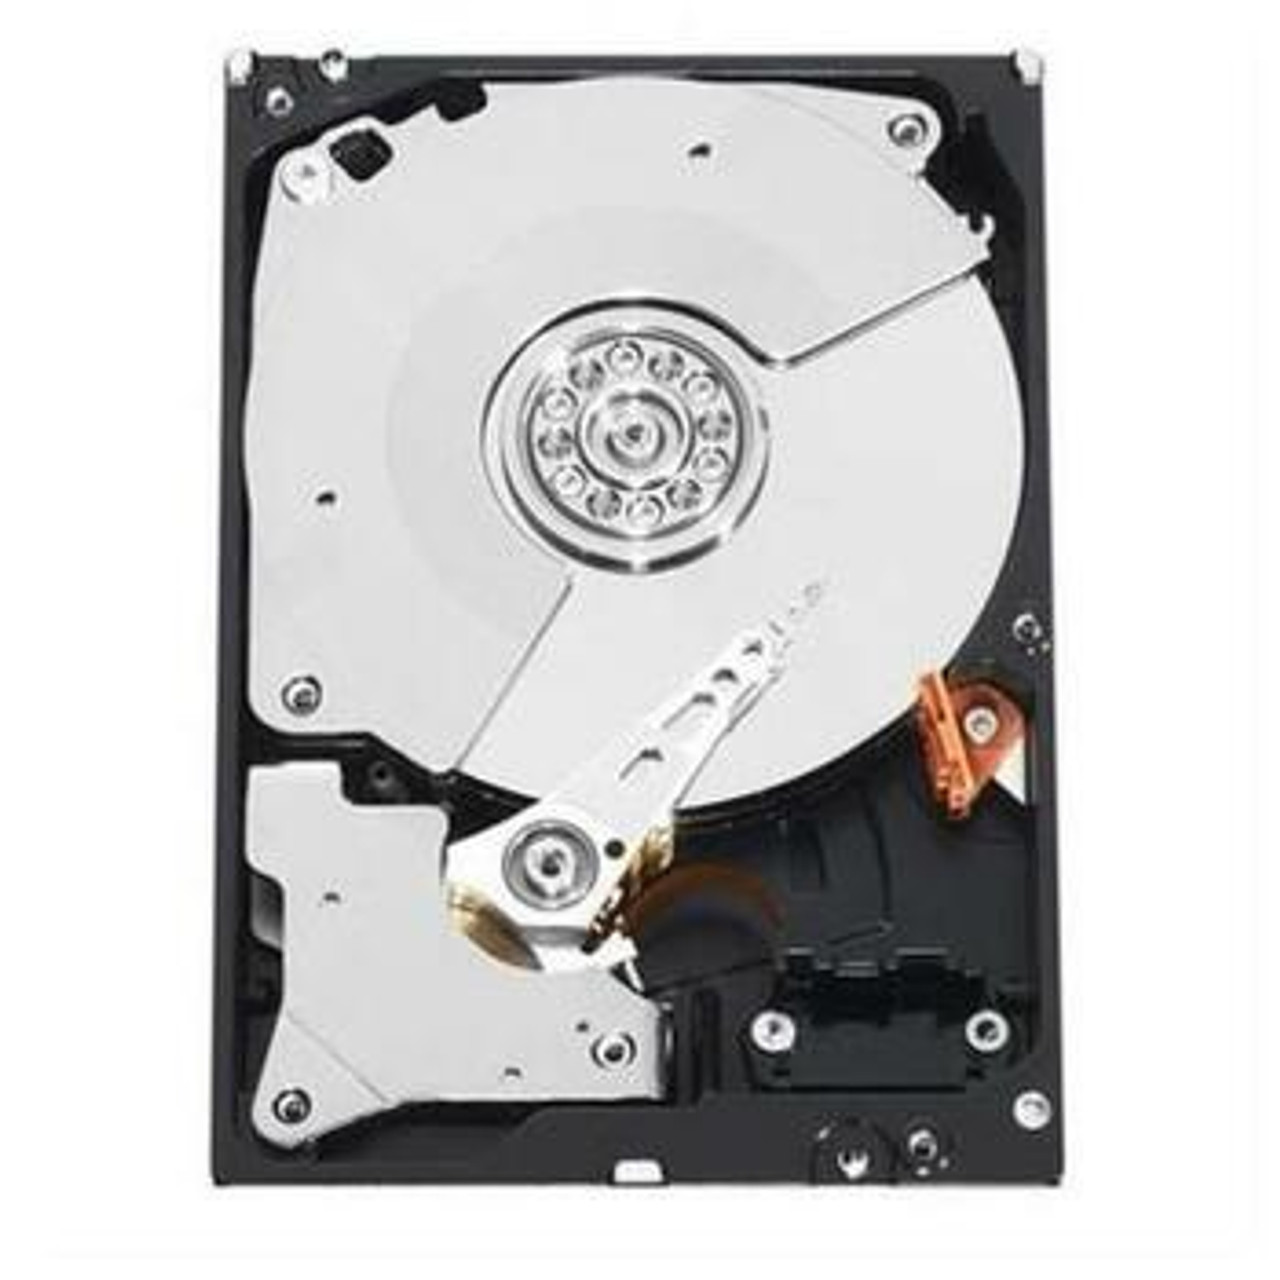 01X09G Dell 900GB 10000RPM SAS 6.0 Gbps 2.5 64MB Cache Hot Swap Hard Drive